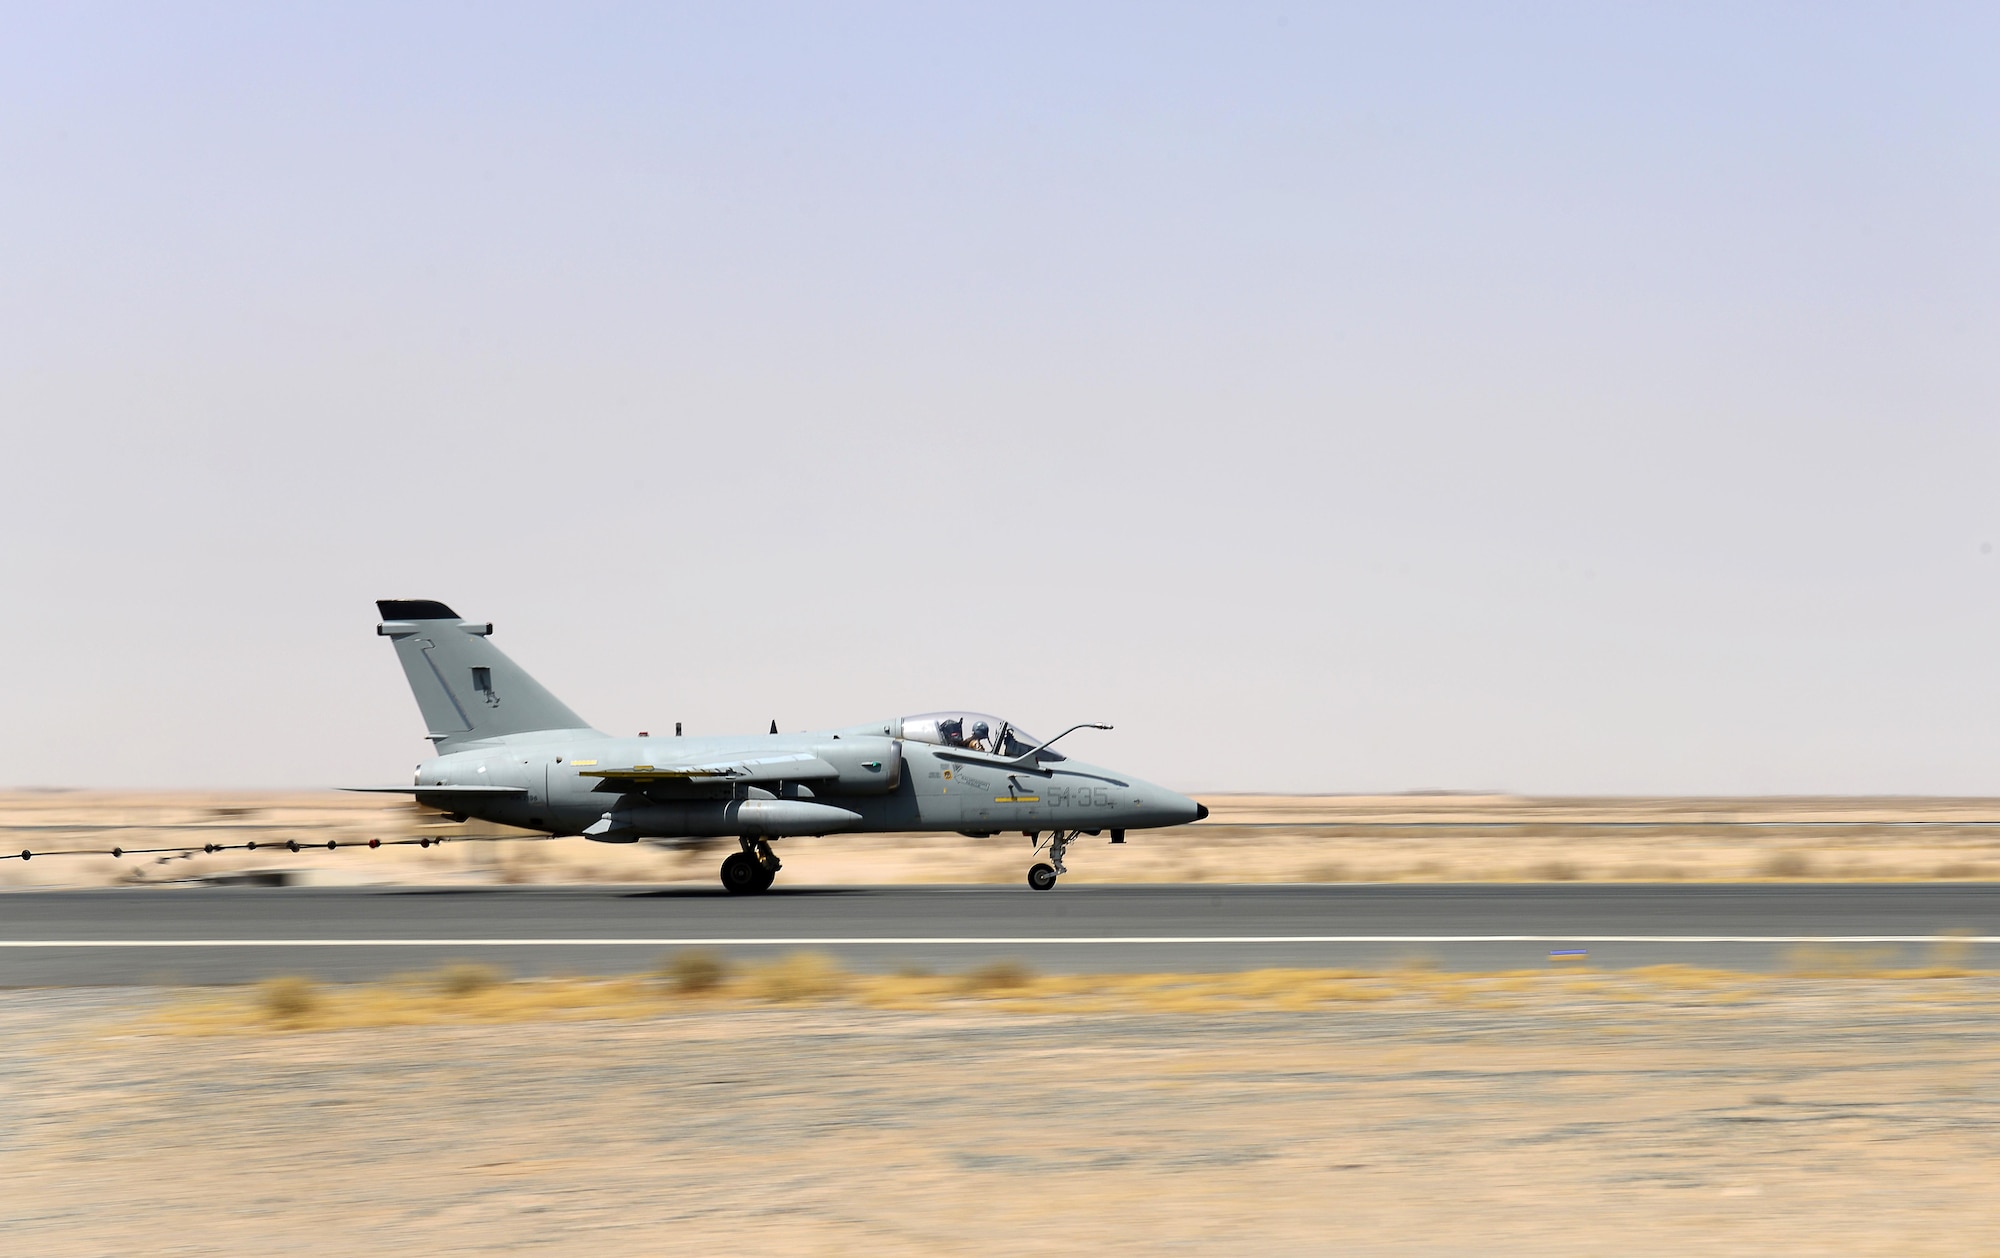 An Italian Air Force (ITAF) AMX A-11 Ghibli aircraft conducts an Aircraft Arresting System engagement during a simulated in-flight emergency in Southwest Asia on July 3, 2017. The AAS allows fighter aircraft to safely stop during an in-flight emergency during takeoff or landing. (U.S. Air Force photo by Tech. Sgt. Andy M. Kin)